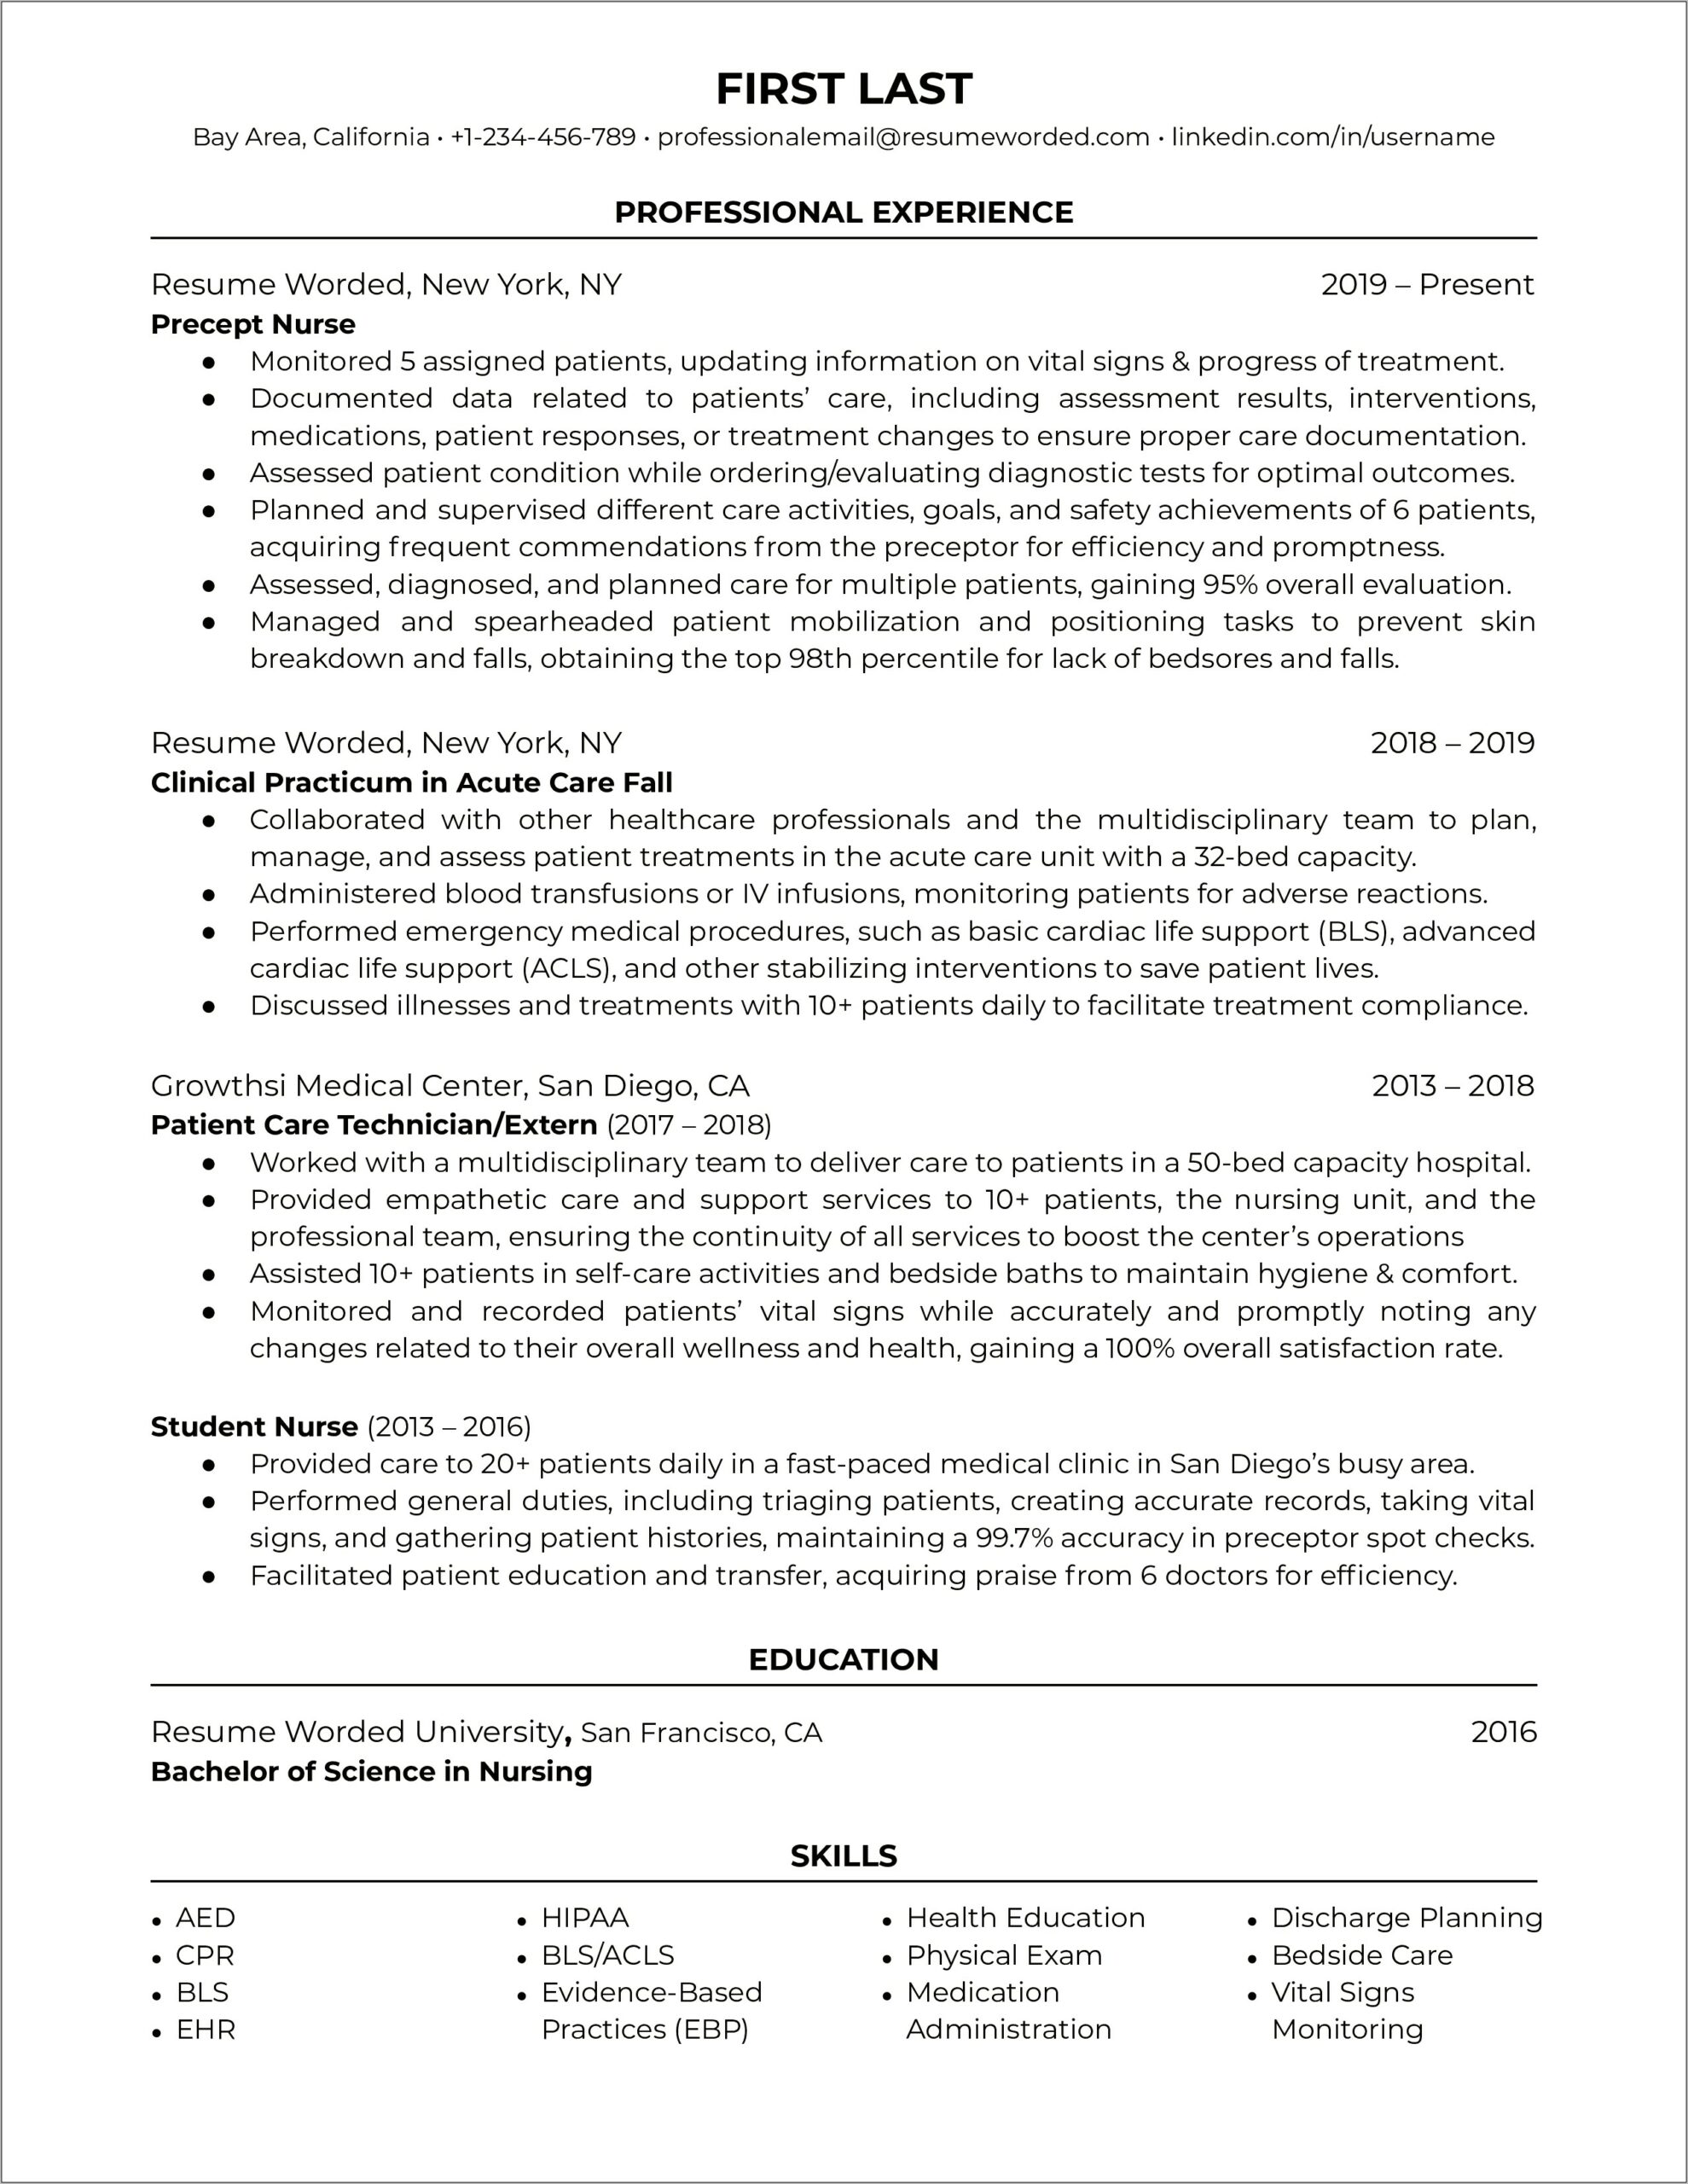 Nursing Student Resume With Clinical Experience